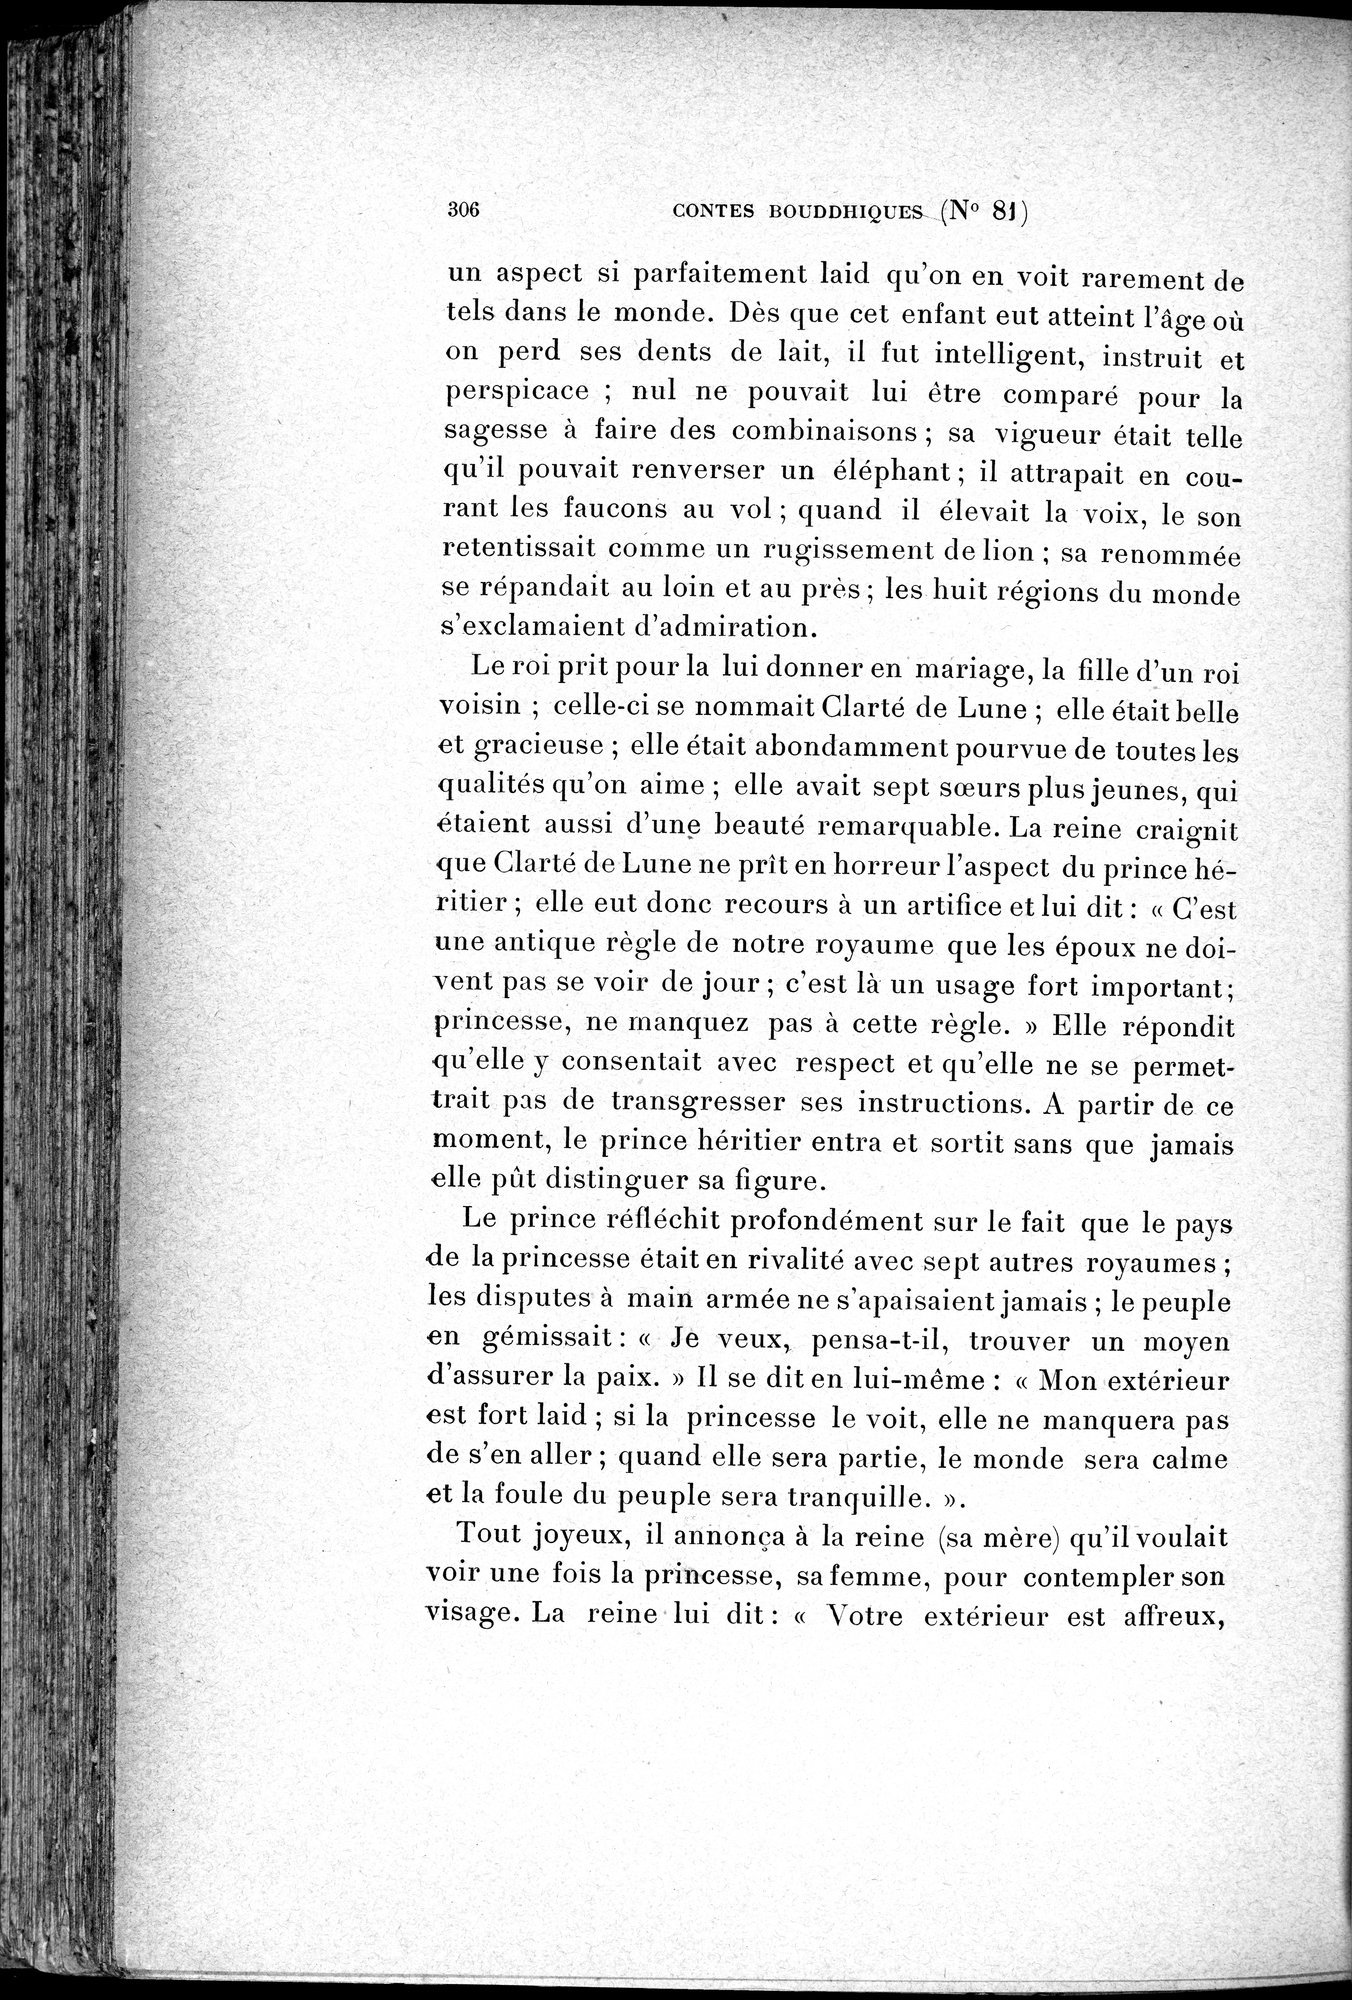 Cinq Cents Contes et Apologues : vol.1 / Page 340 (Grayscale High Resolution Image)